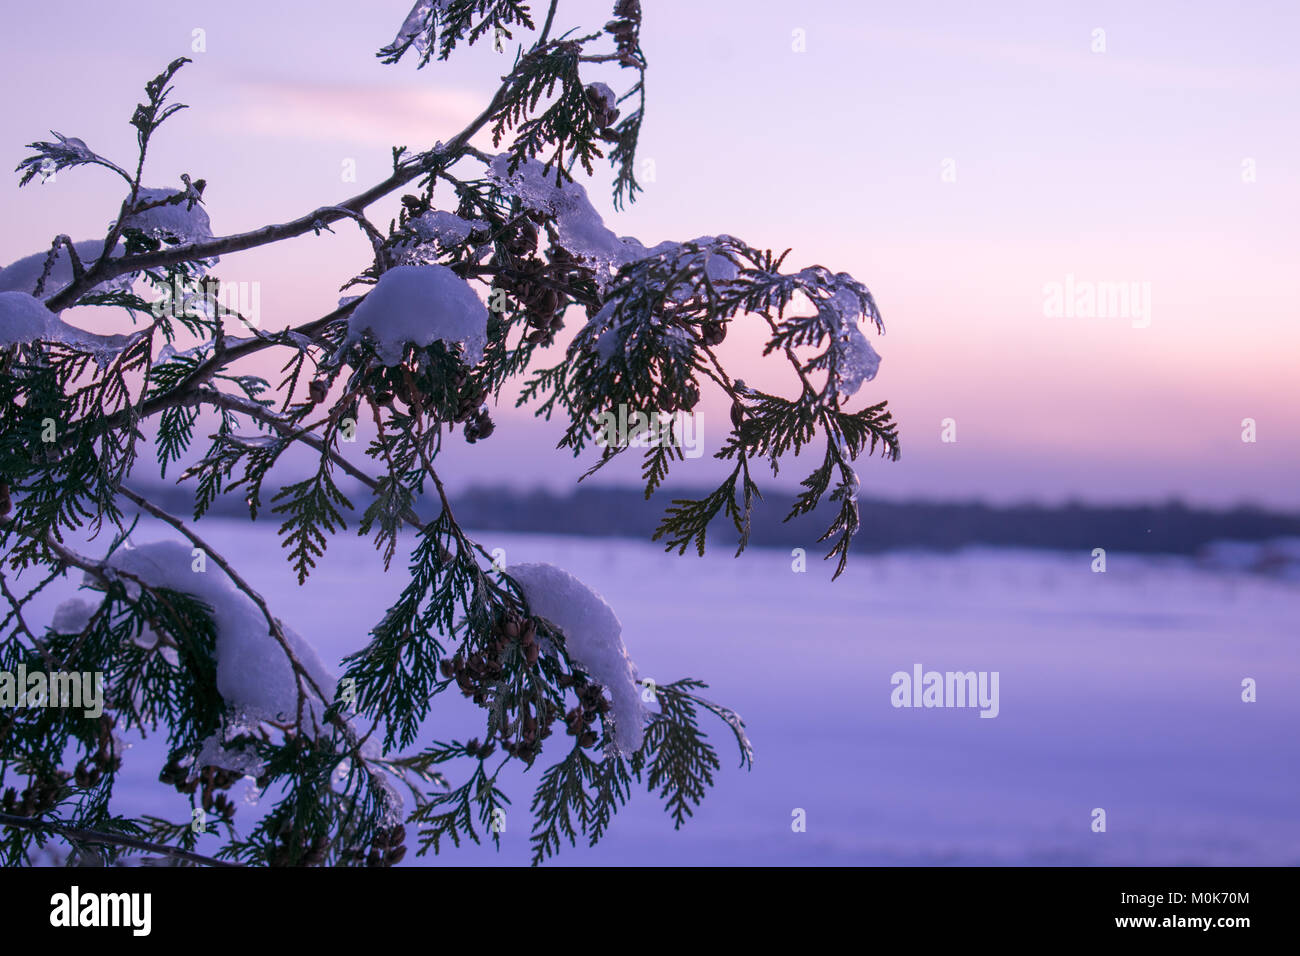 Cedar branches covered in snow with a landscape of snow, trees, and a purplish sky with pink clouds for a backdrop Stock Photo